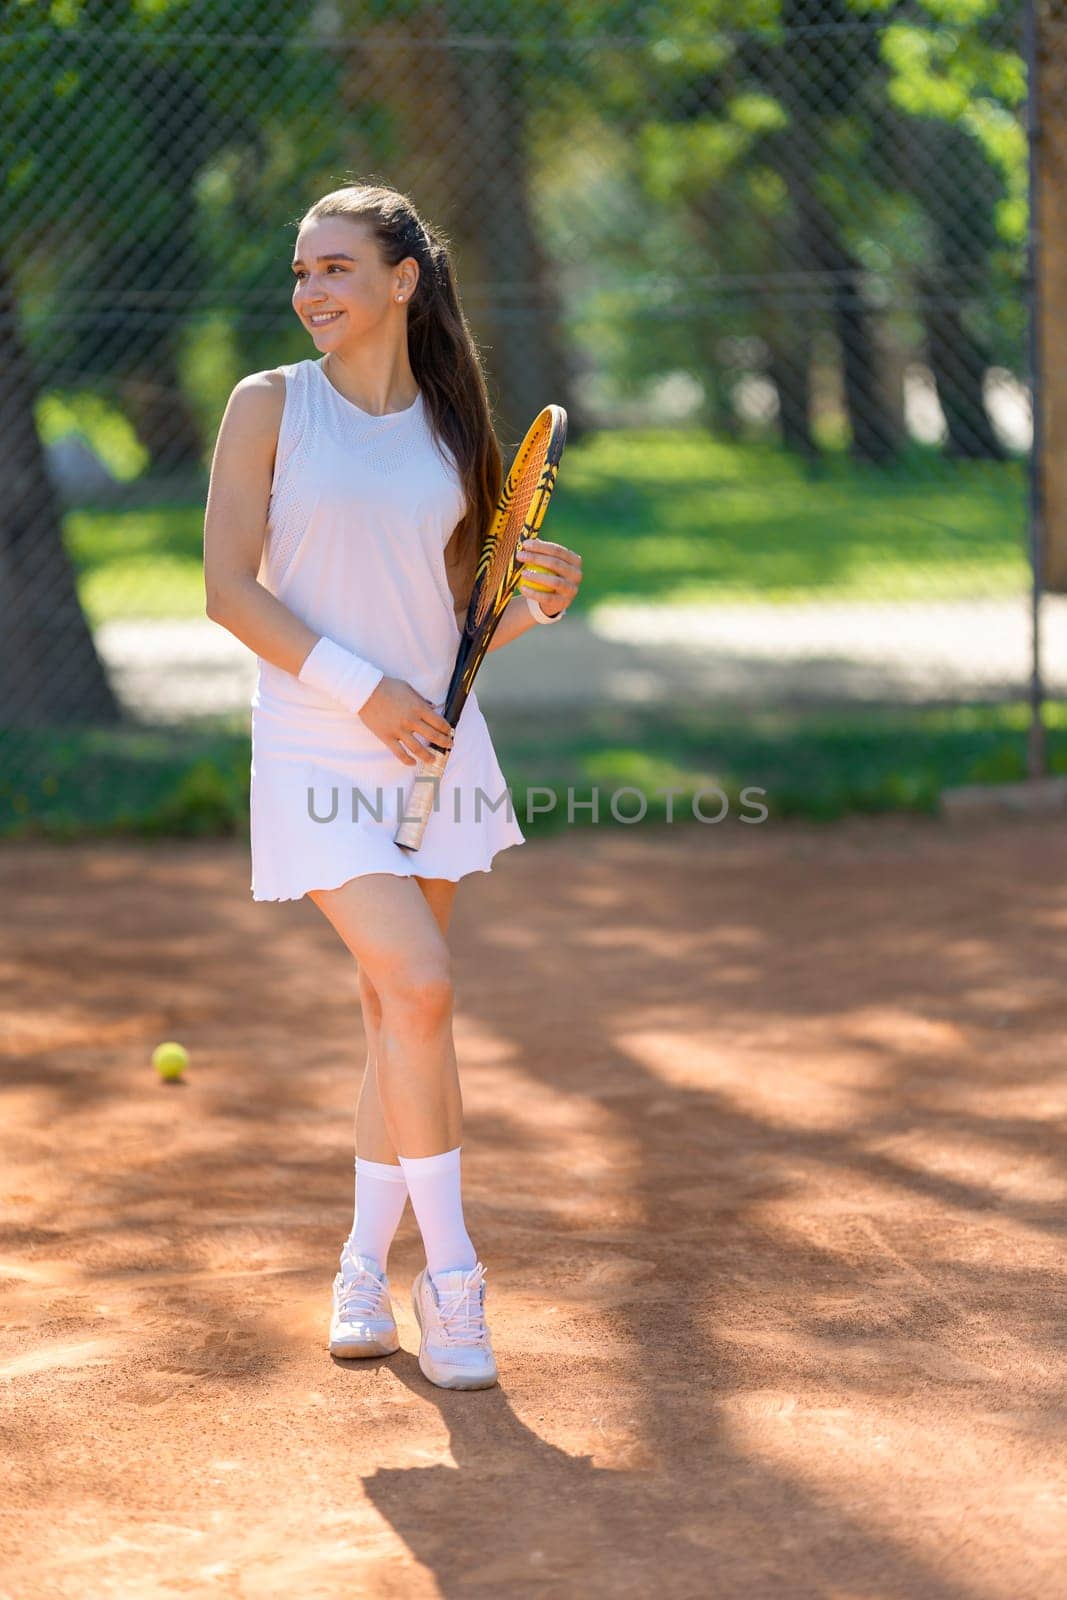 A woman is standing on a tennis court holding a tennis racket. She is wearing a white dress and white socks